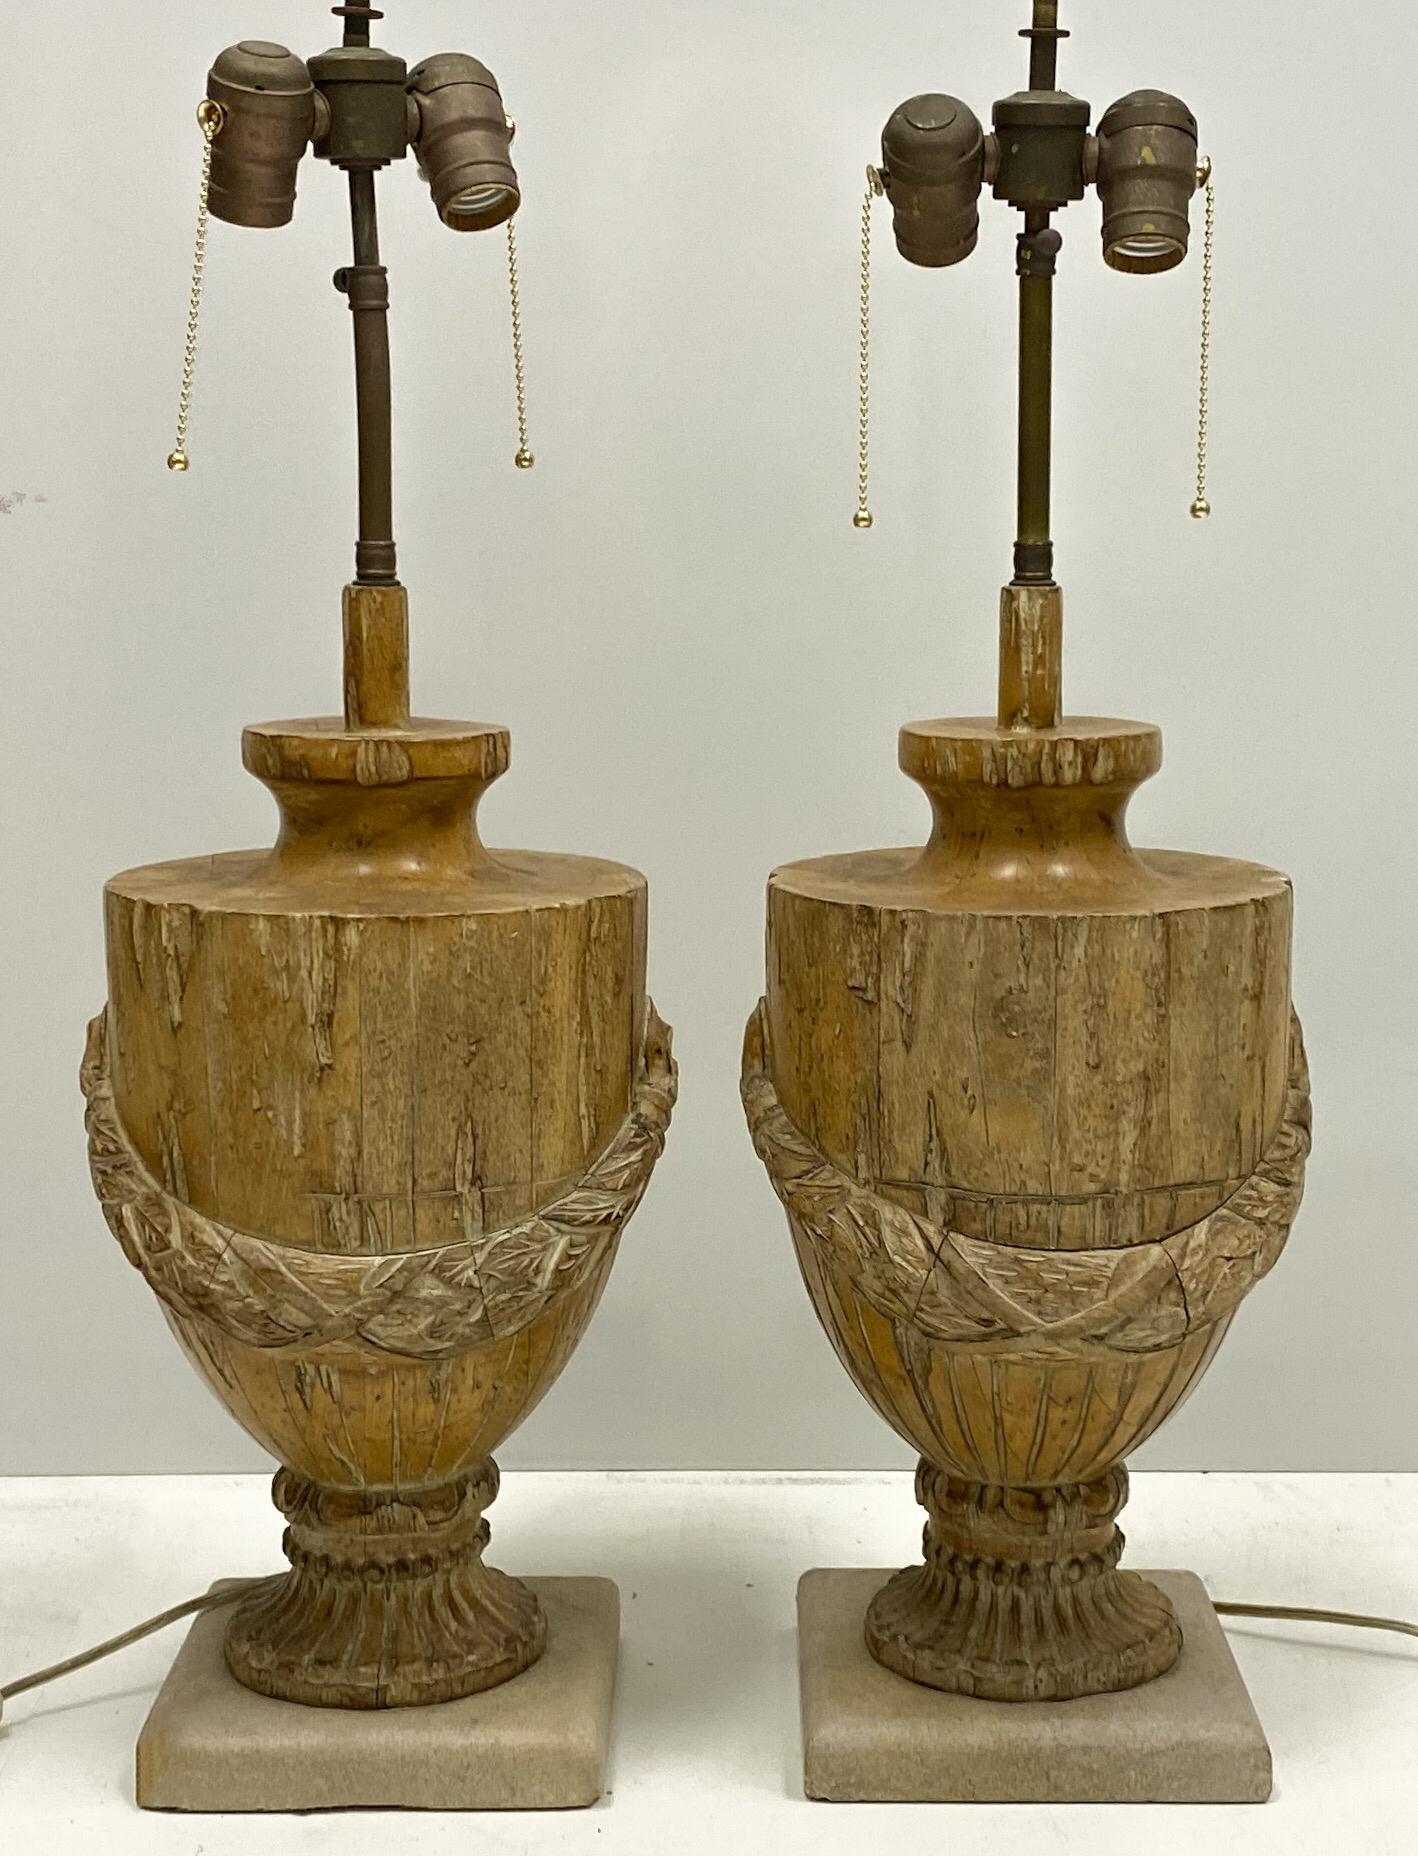 This is a pair of 19th century carved urns that have been adapted into lamps. The bases are vintage sandstone. The wiring is new. It is 18 inches to the tops of the urns, and they are 9 inches in diameter. Great patina!